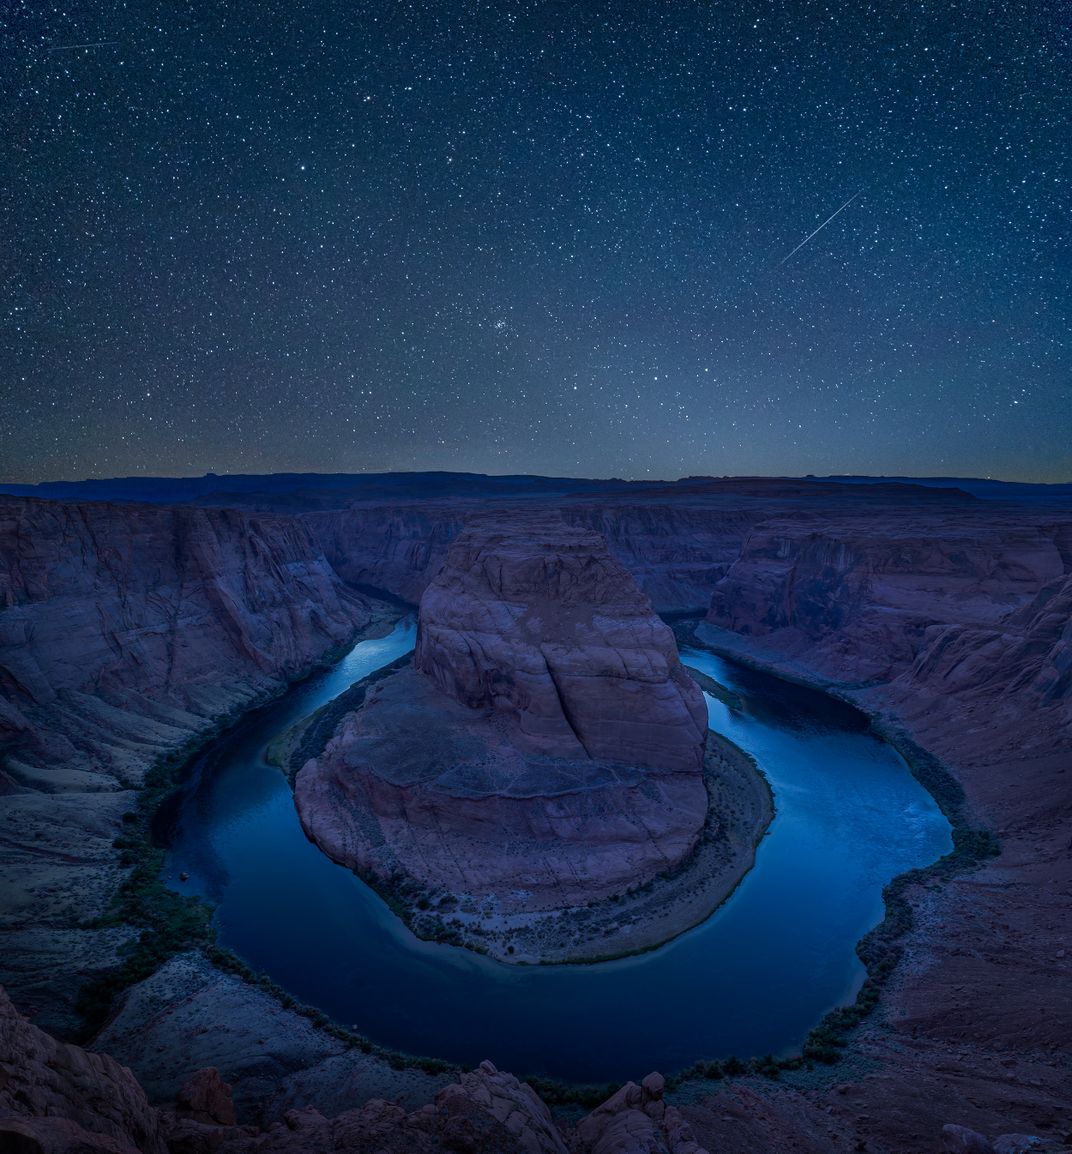 A starry night sky reflects light off the shallow waters of Horseshoe Bend in Glen Canyon National Recreation Area